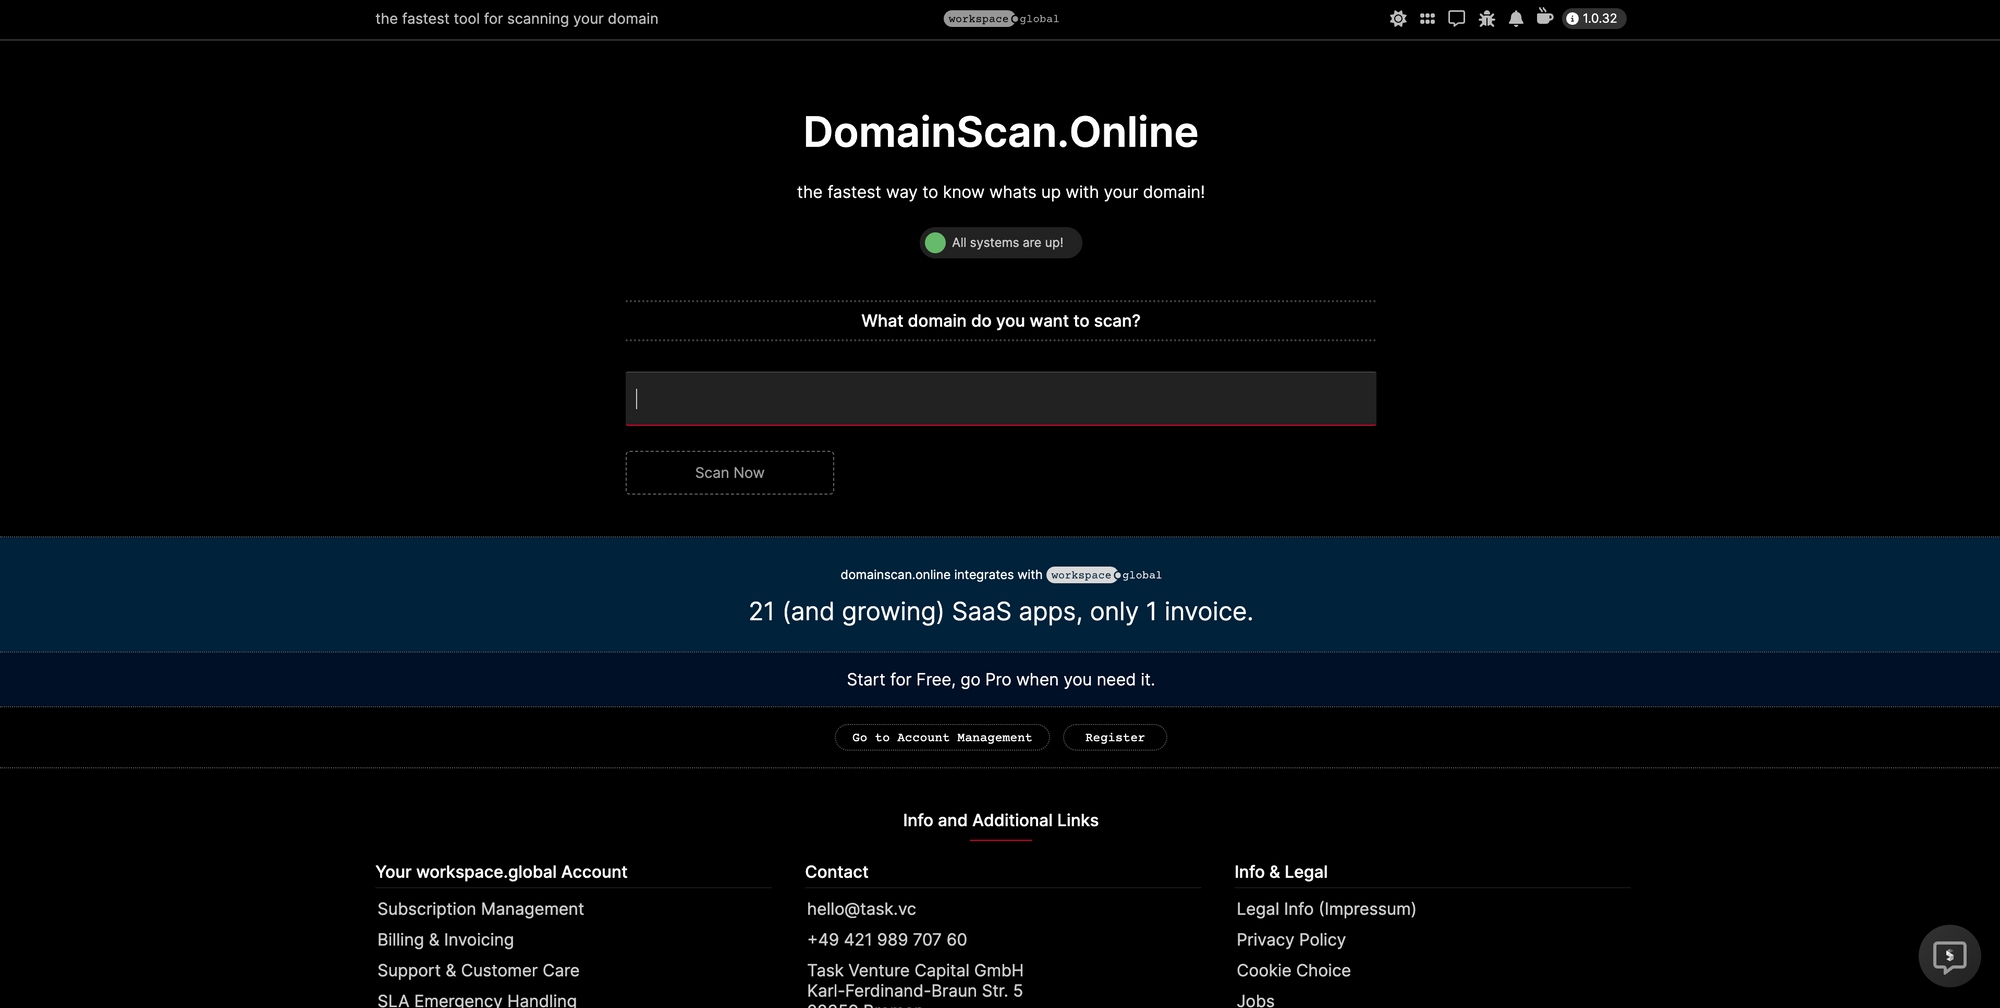 Introducing domainscan.online